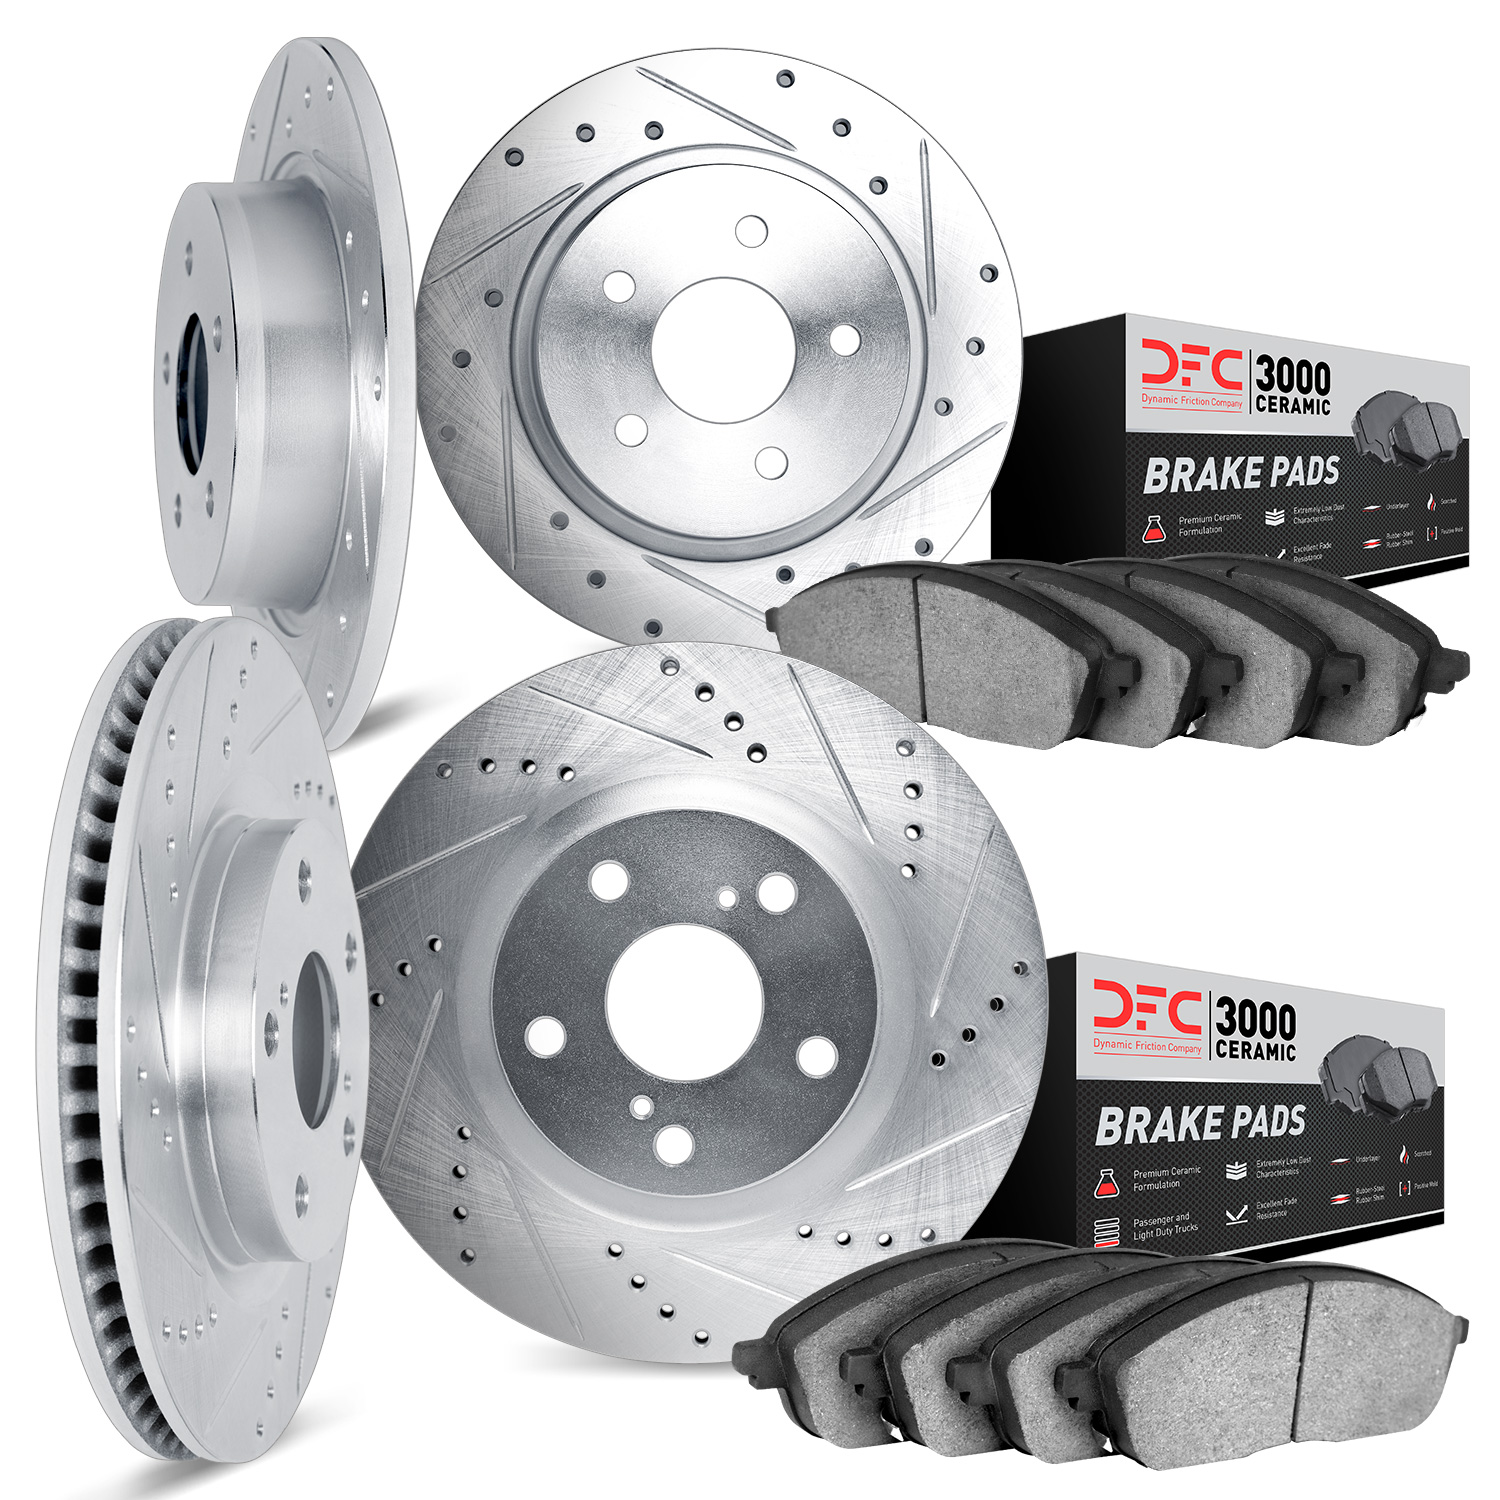 7304-01008 Drilled/Slotted Brake Rotor with 3000-Series Ceramic Brake Pads Kit [Silver], 2010-2013 Suzuki, Position: Front and R